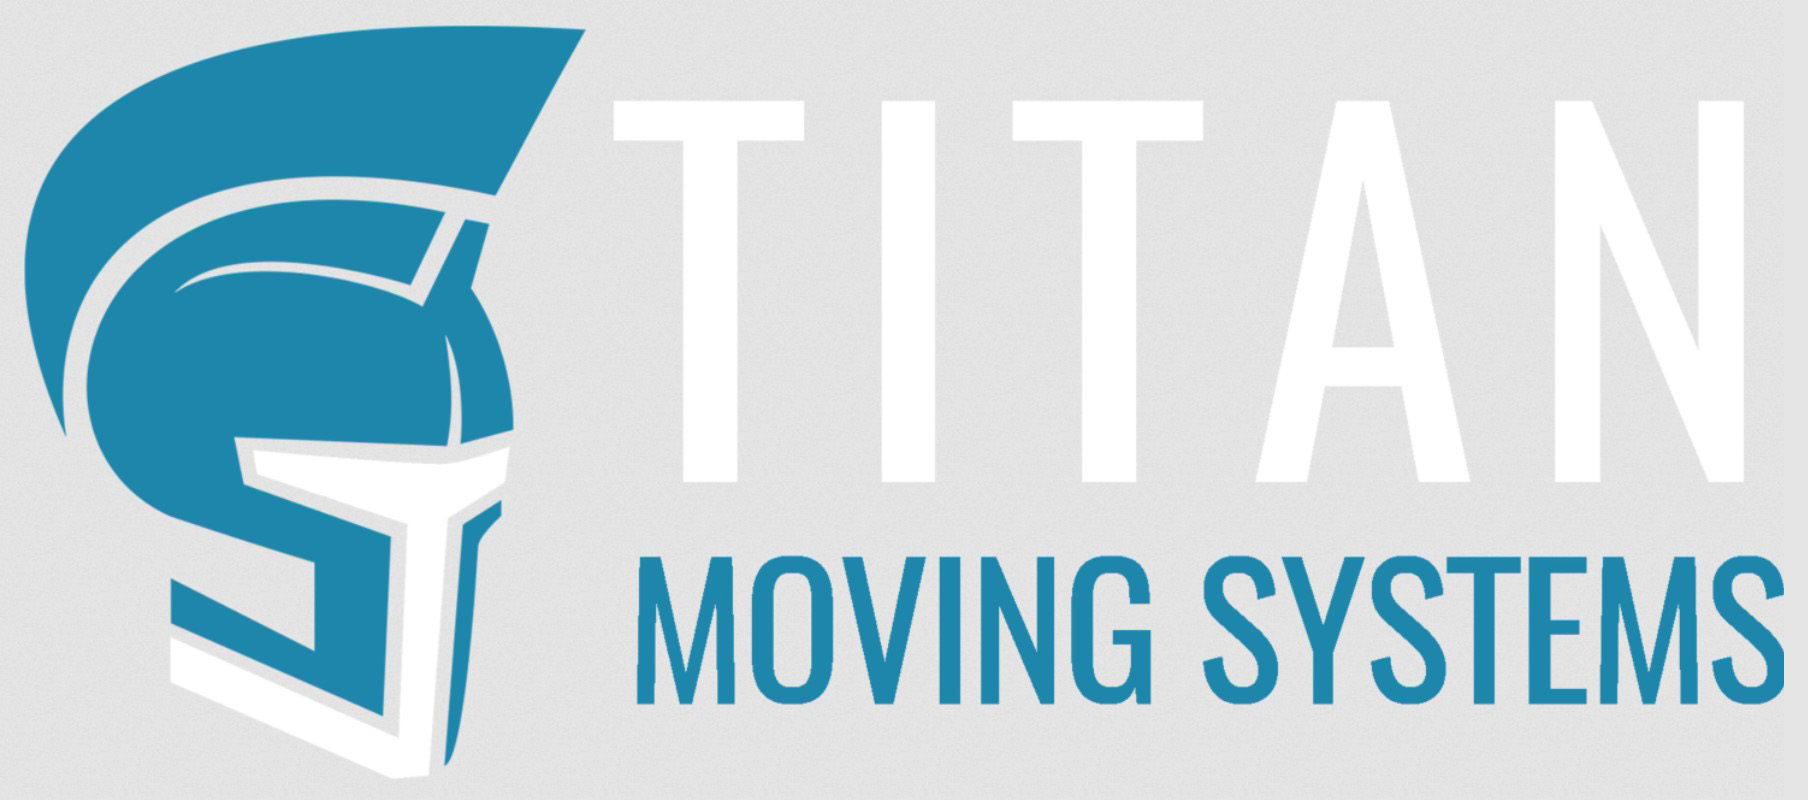 Titan Moving Systems